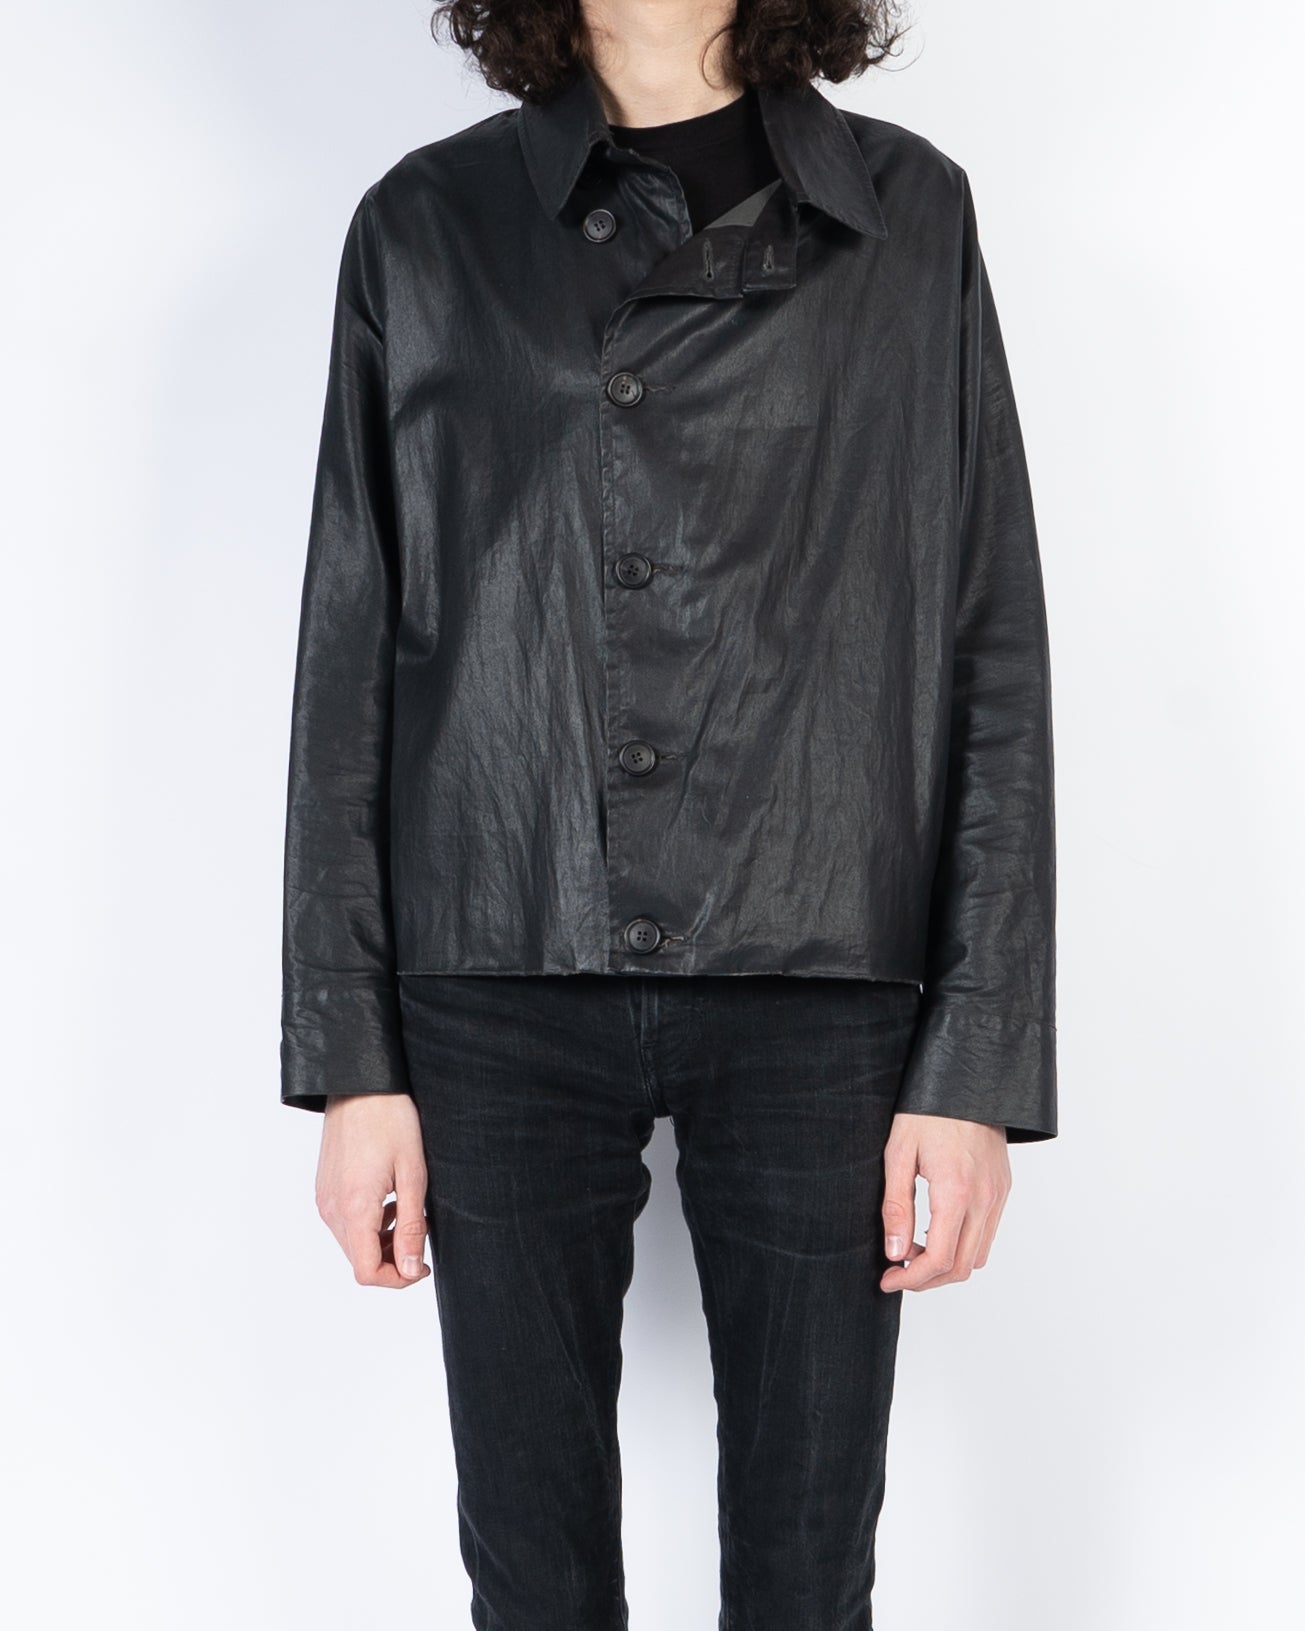 Black Waxed Buttoned Jacket